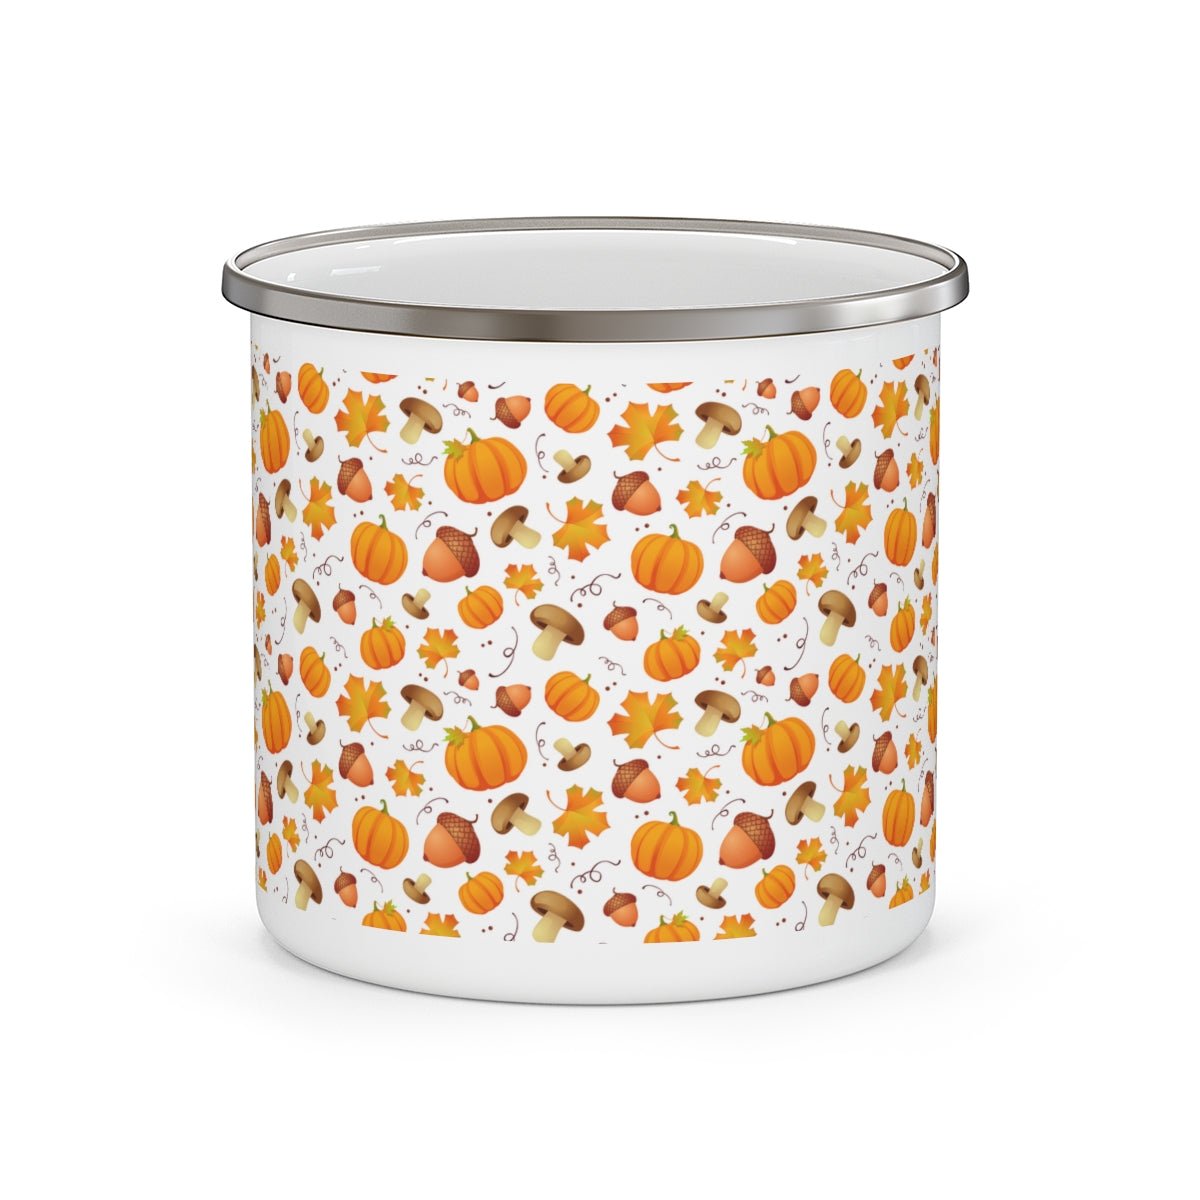 Pumpkins and Acorns Stainless Steel Camping Mug - Puffin Lime